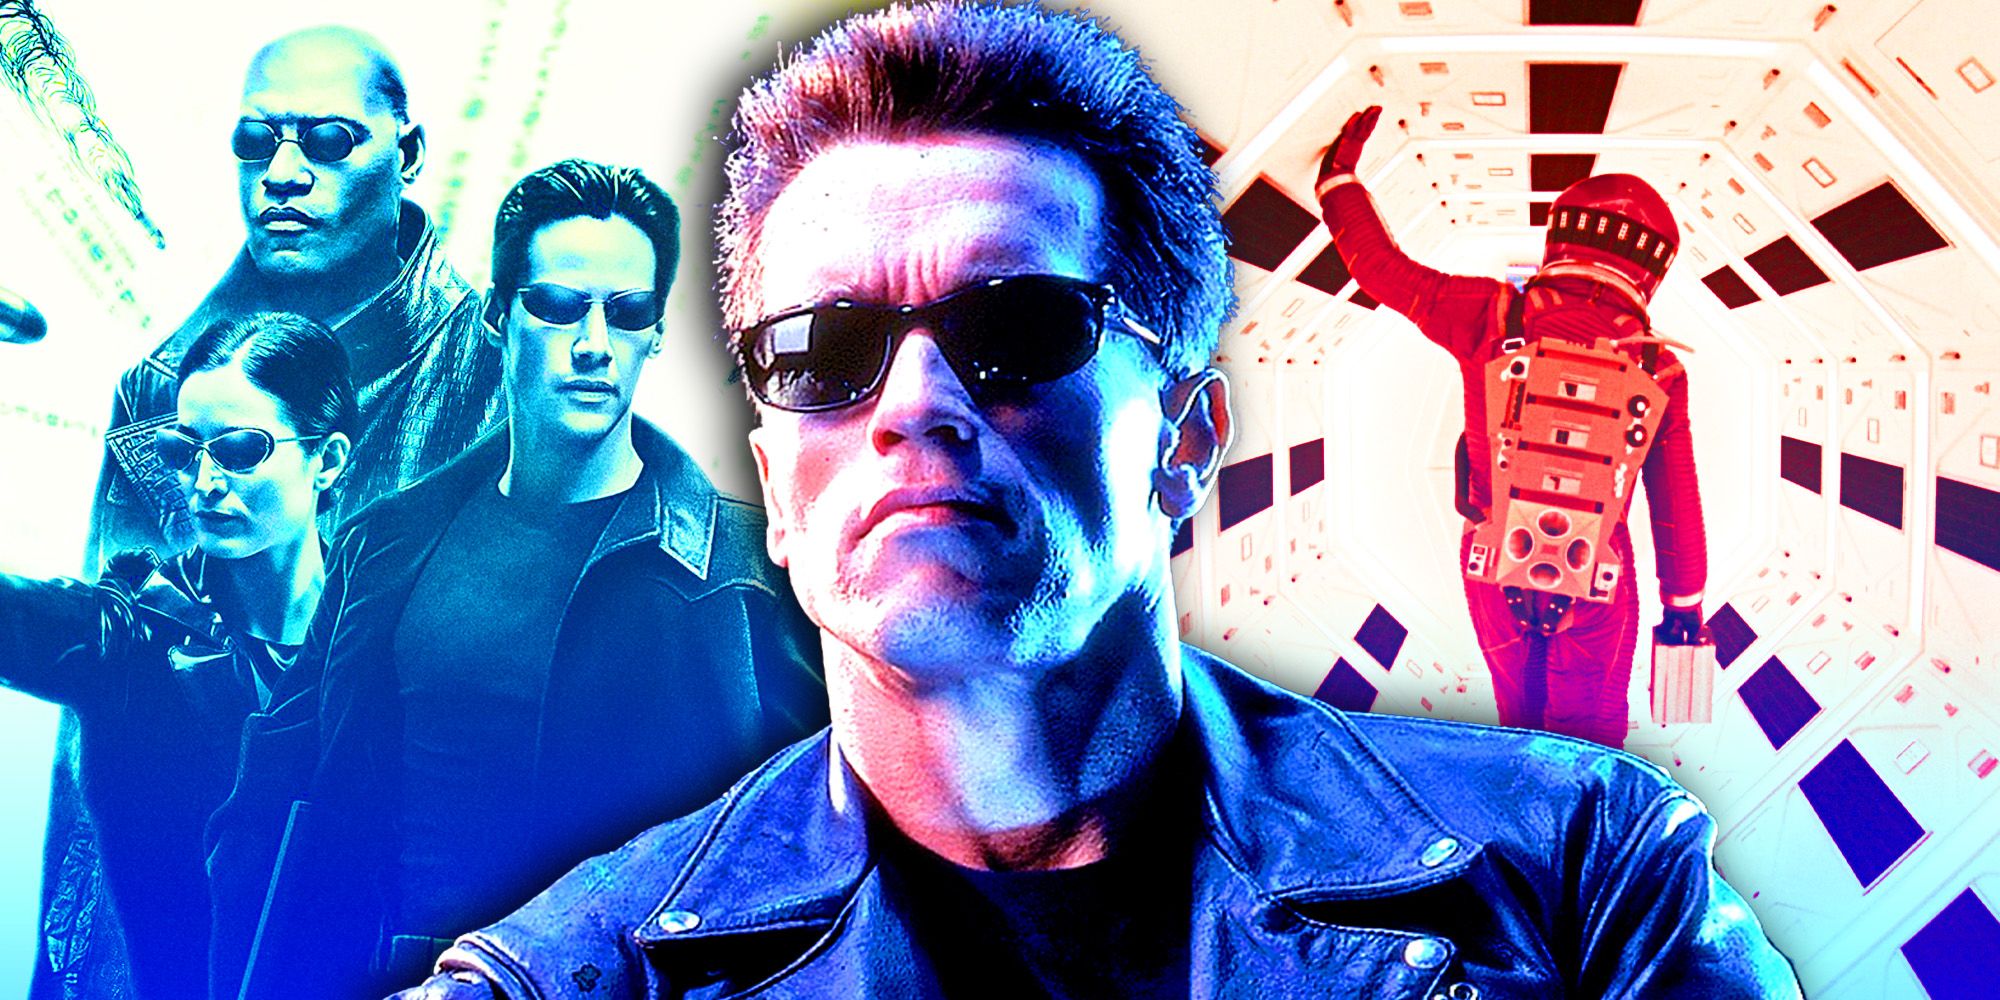 The Matrix, Terminator, and 2001 a Space odyssey